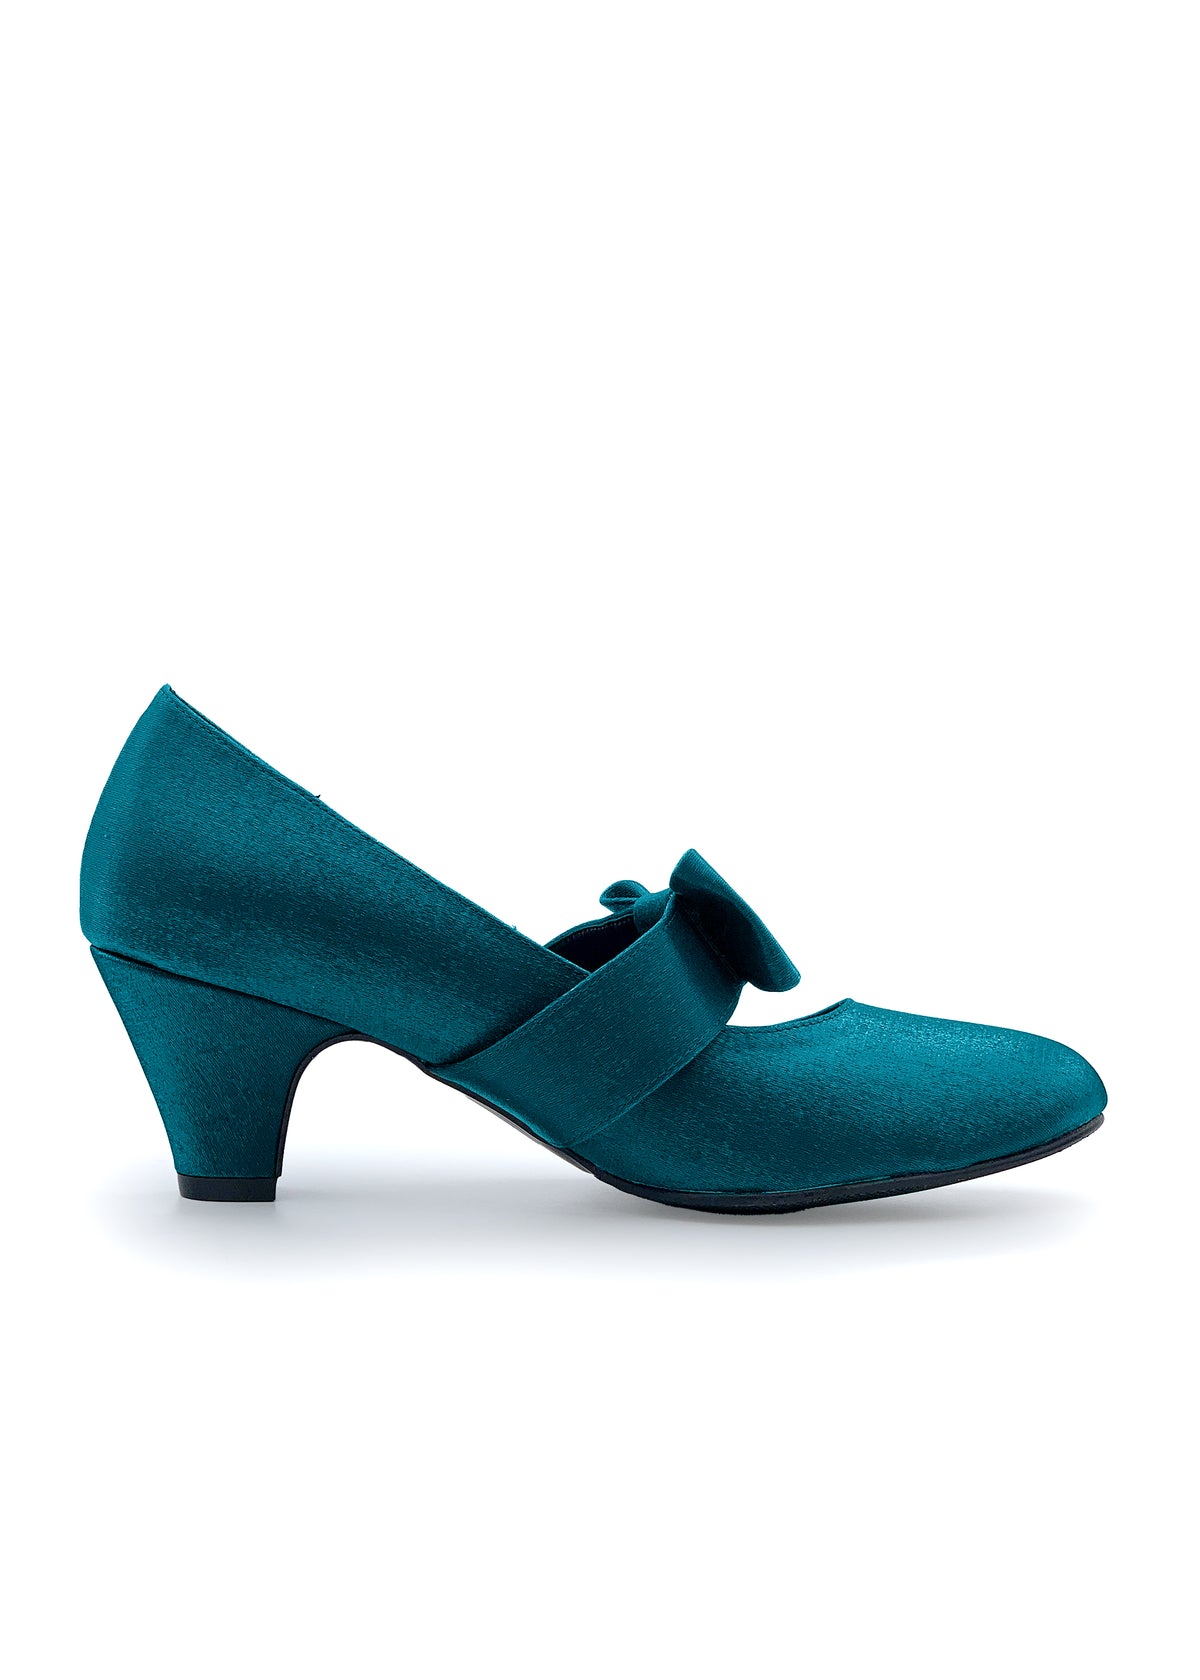 Open-toed shoes with bow straps - petrol blue satin